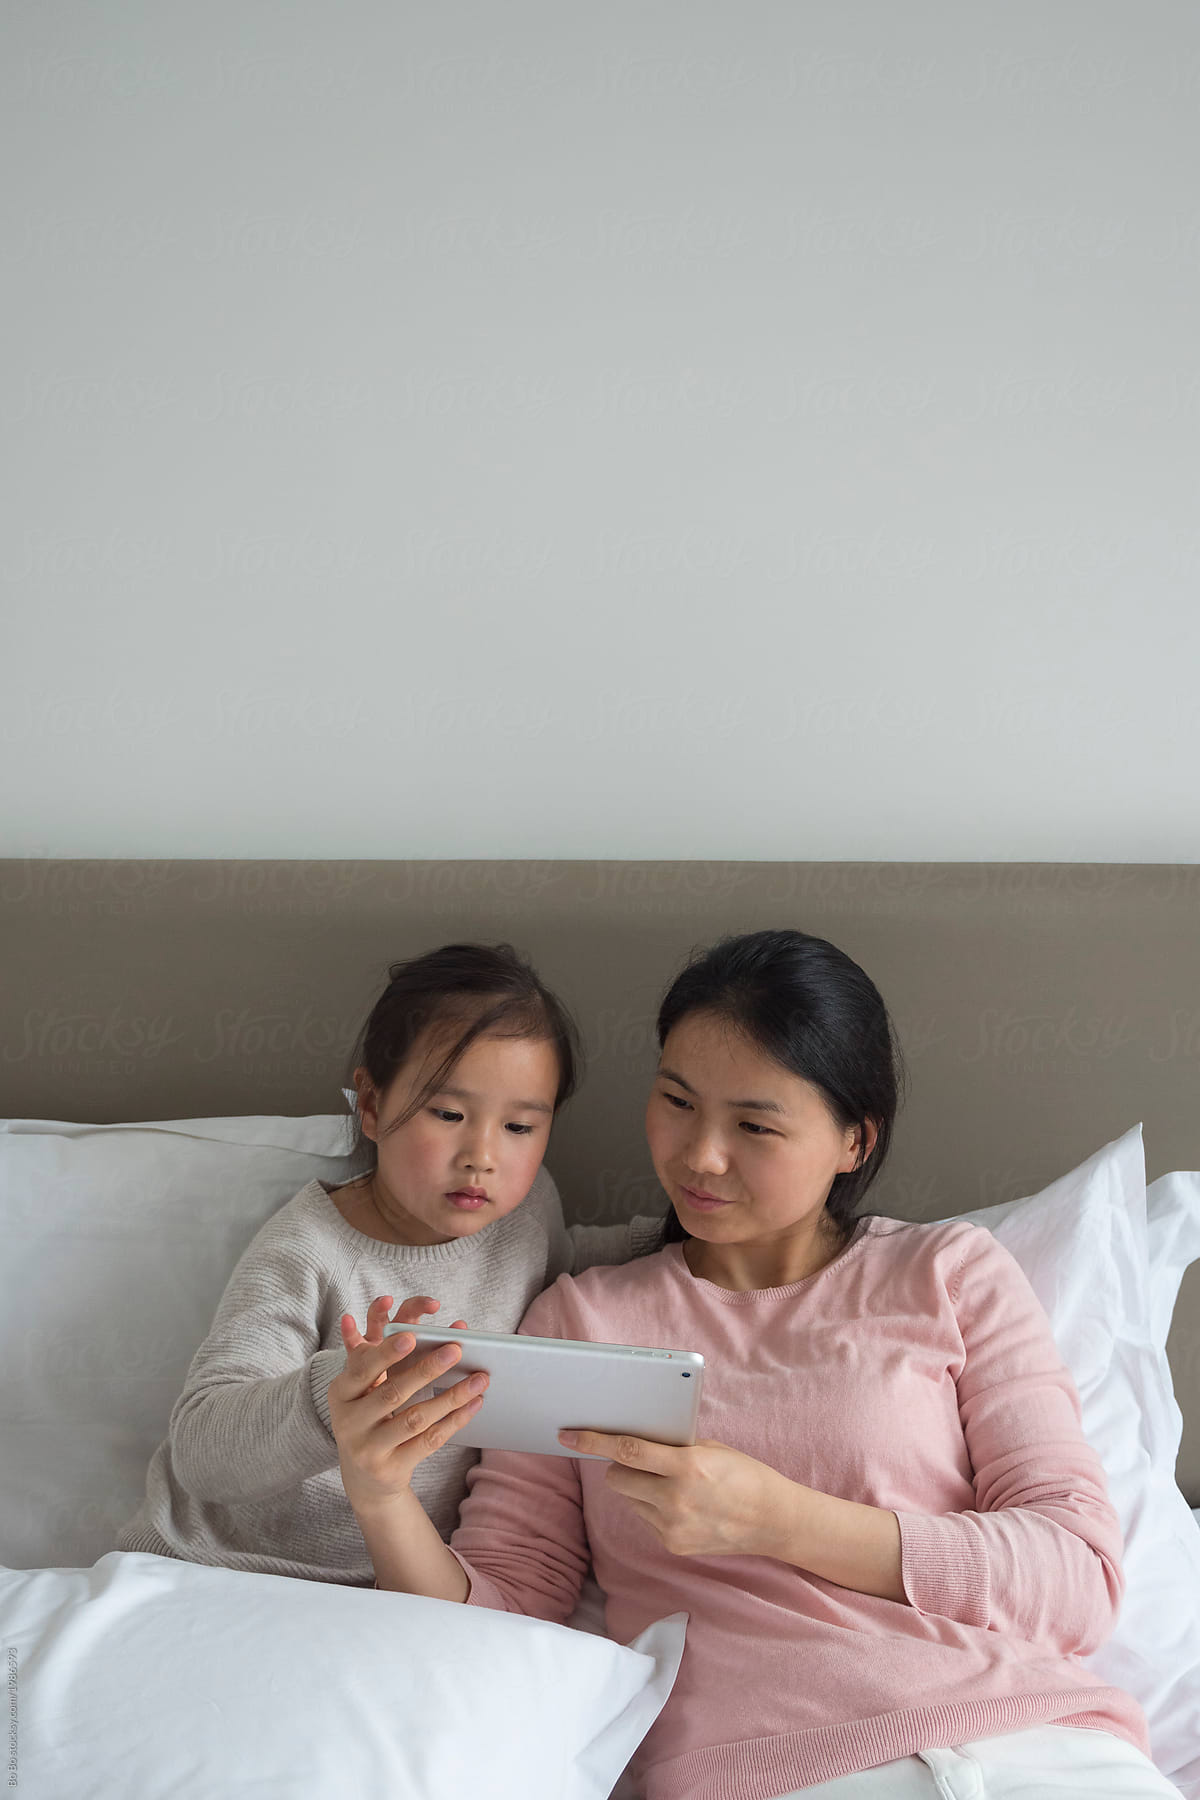 Little asian girl with her mother in bed using tablet